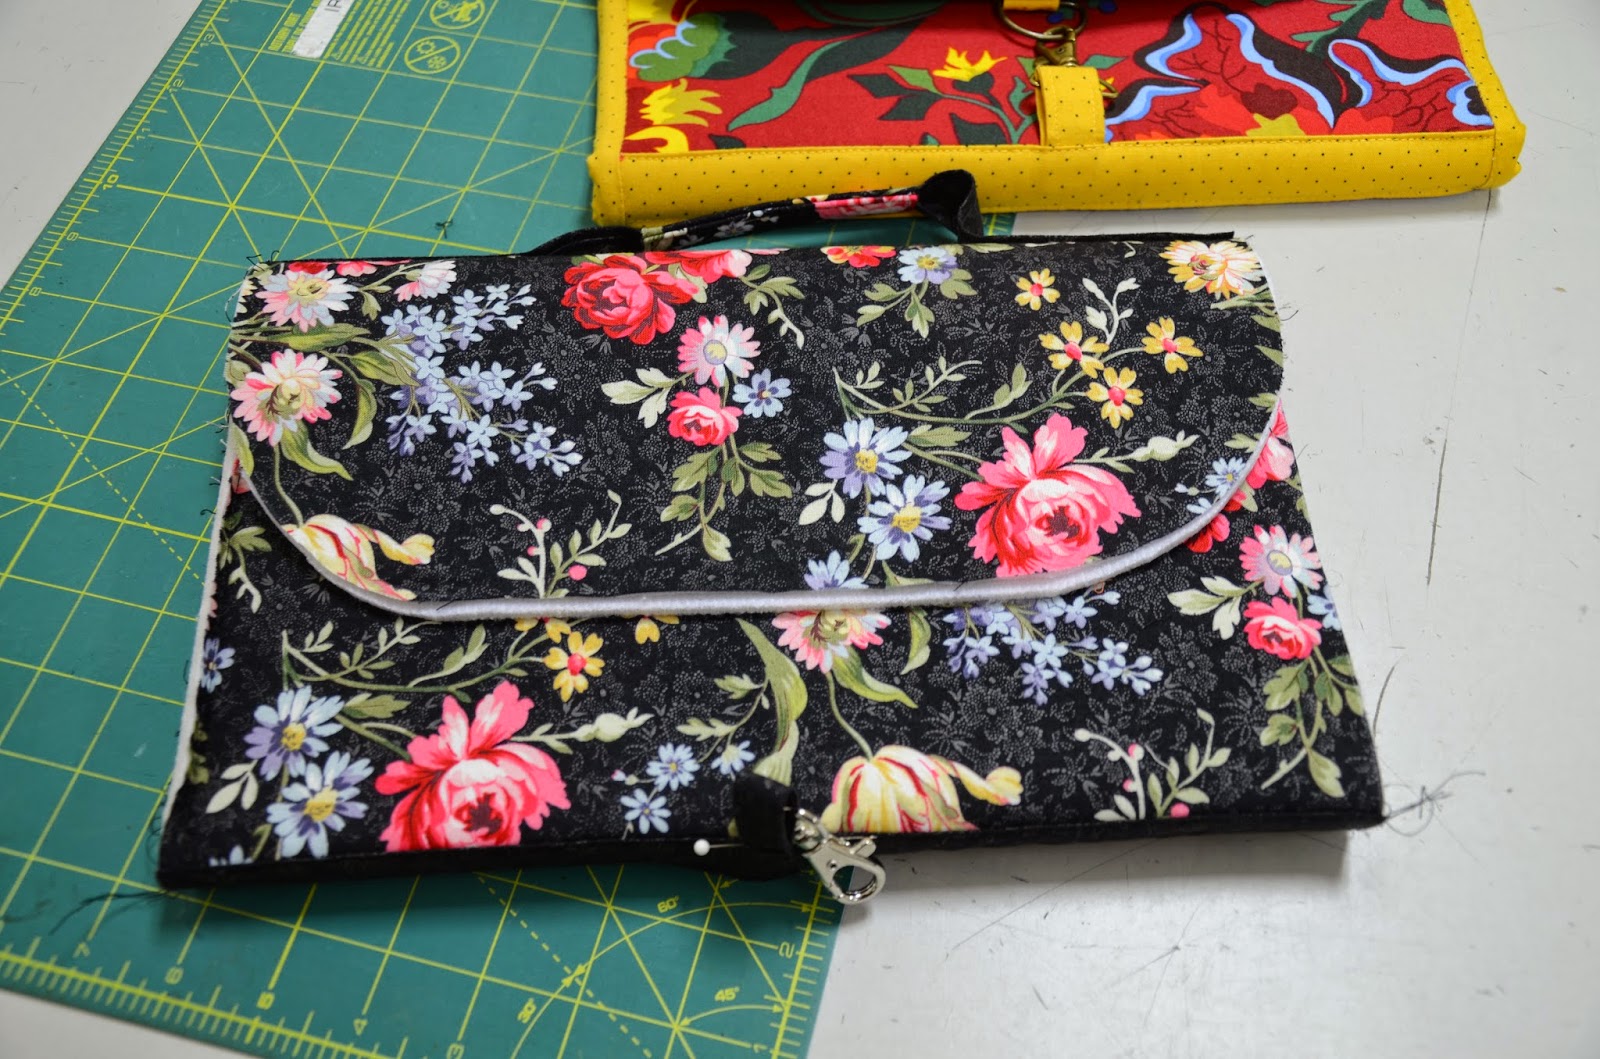 Sew'n Wild Oaks Quilting Blog: Sew'n Wild Oaks Class is in Session